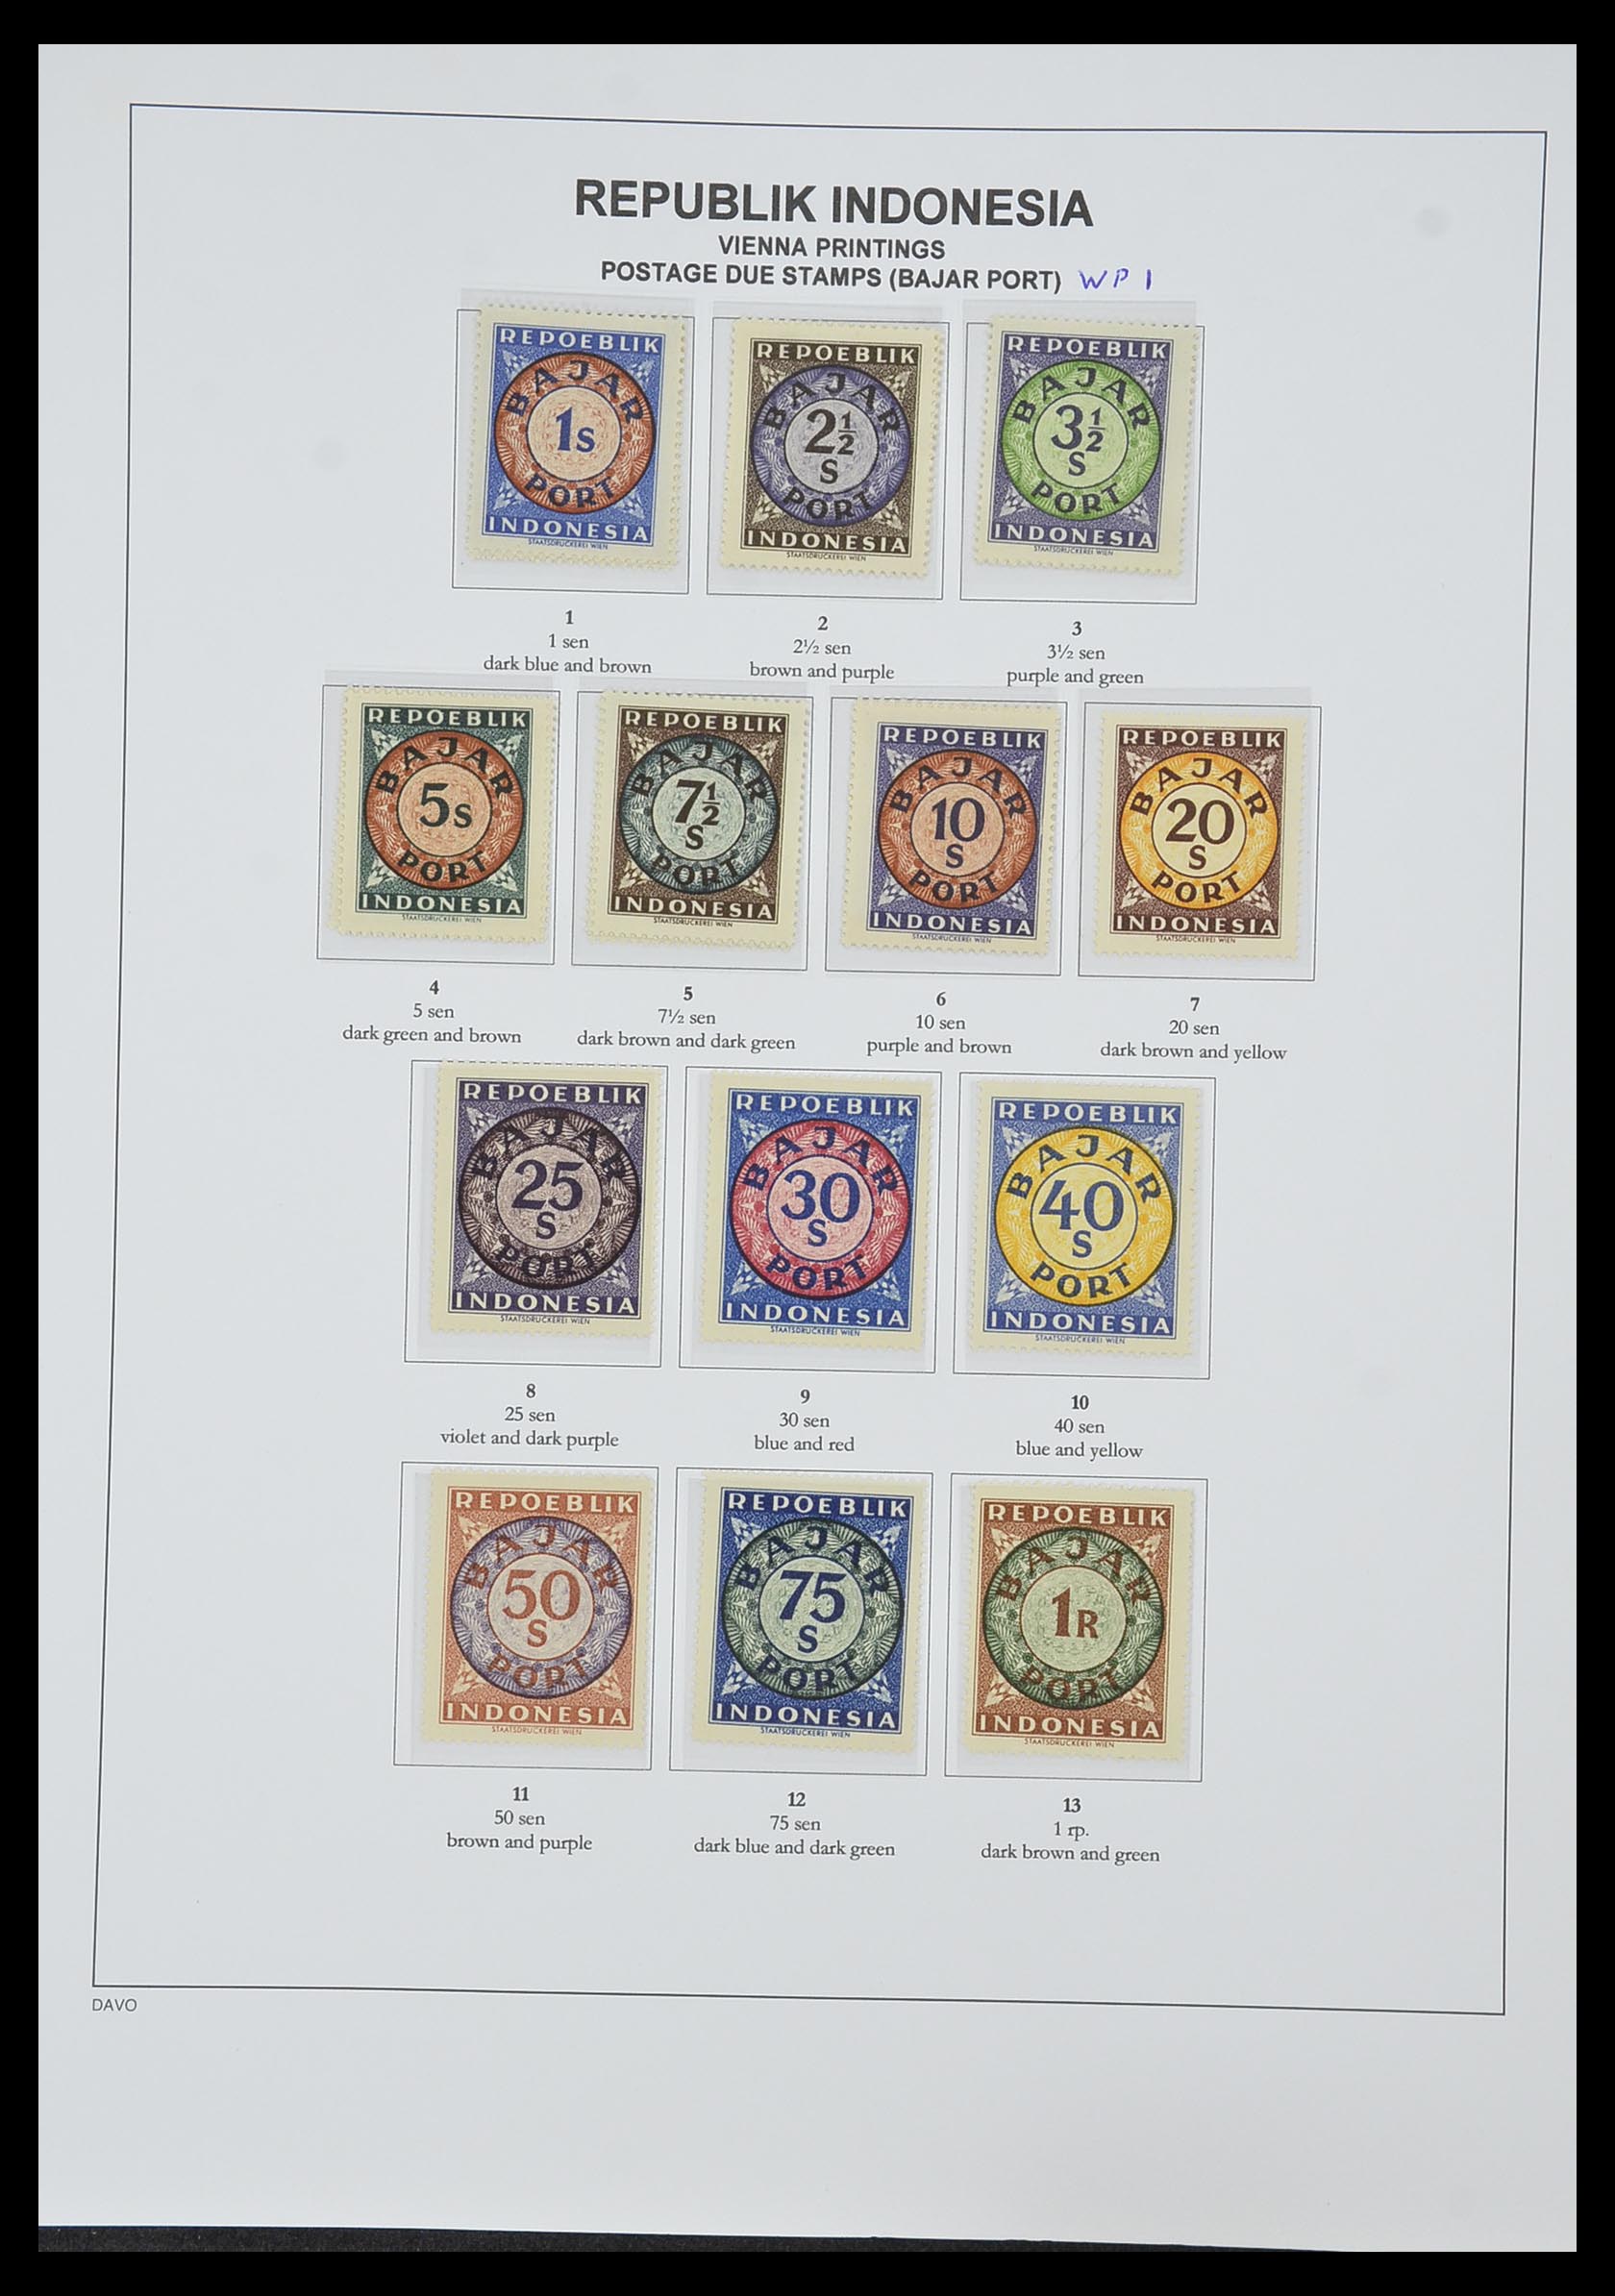 33988 054 - Stamp collection 33988 Vienna printings Indonesia.